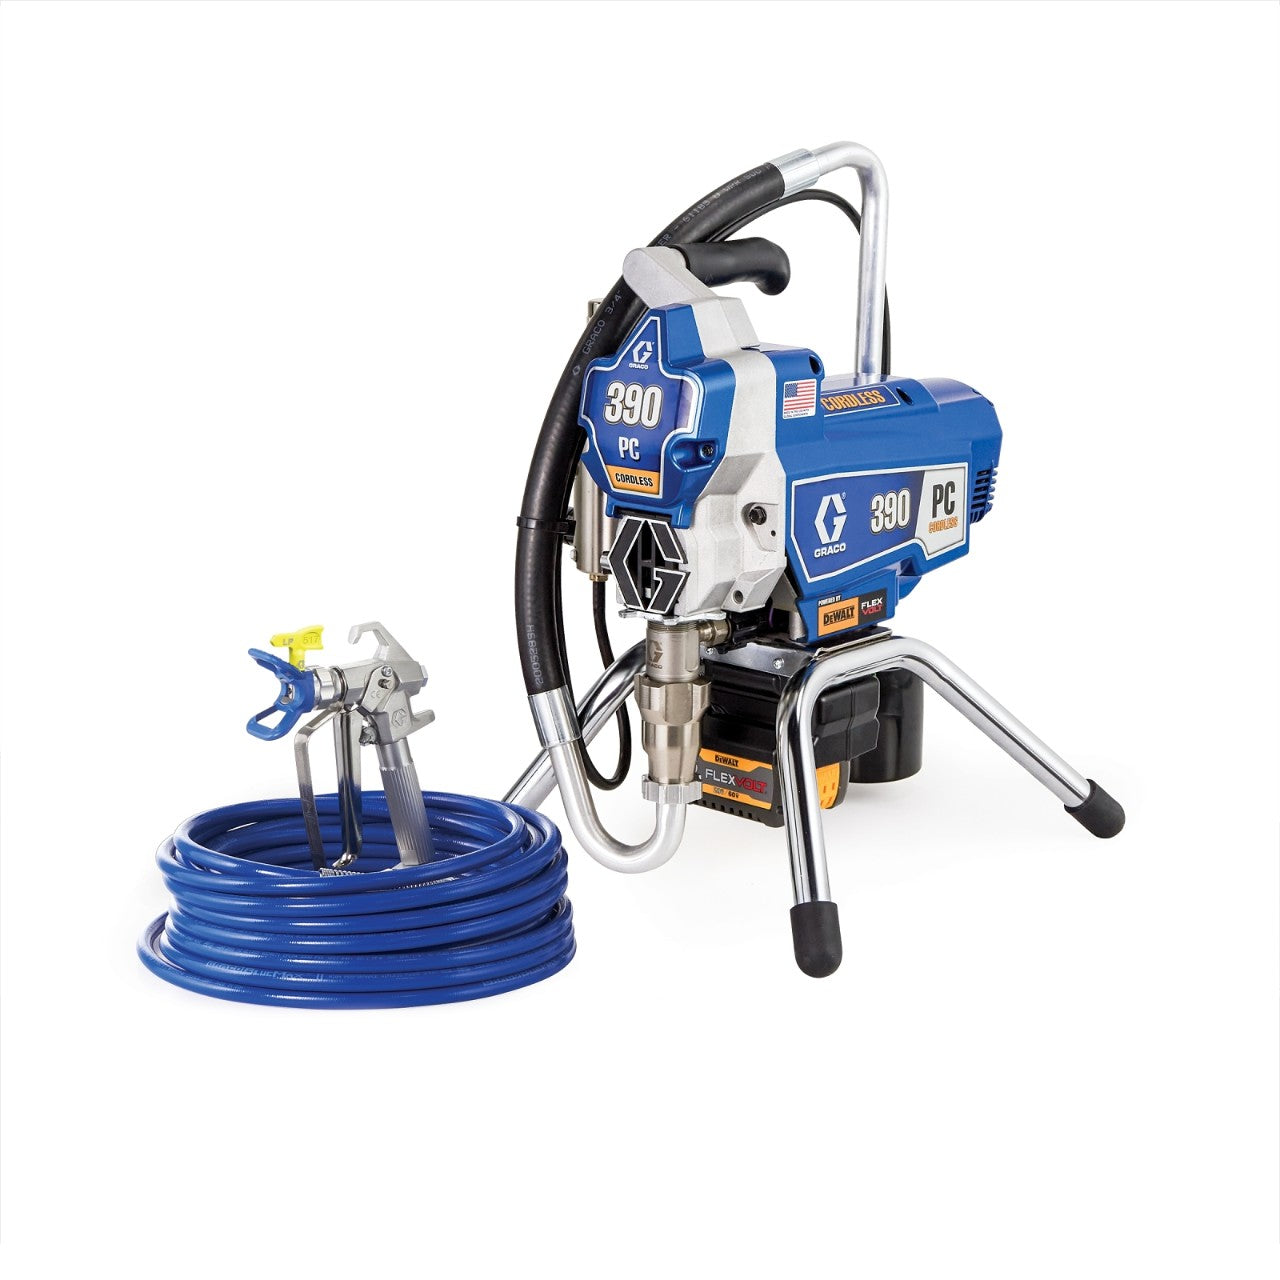 GRACO 390 PC Stand Cordless Airless Sprayer